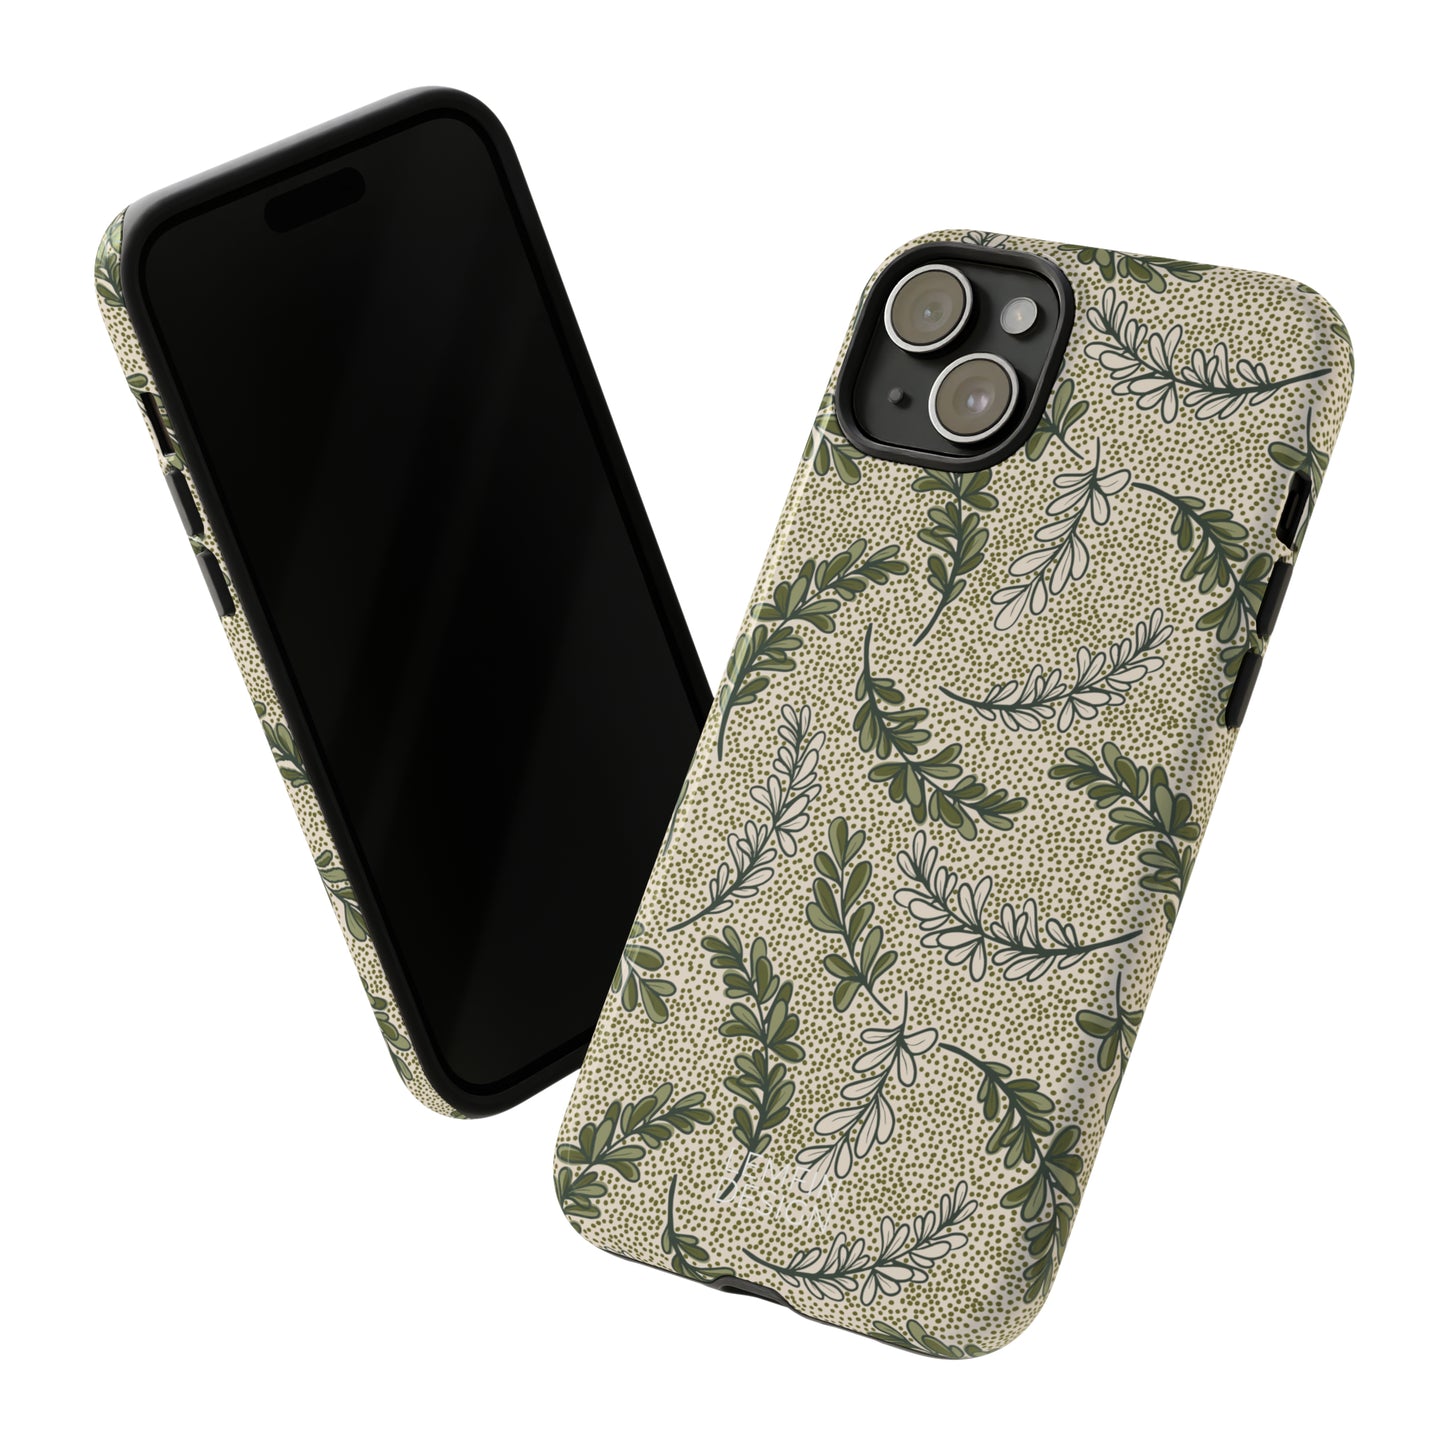 Dotted floral Phone Case